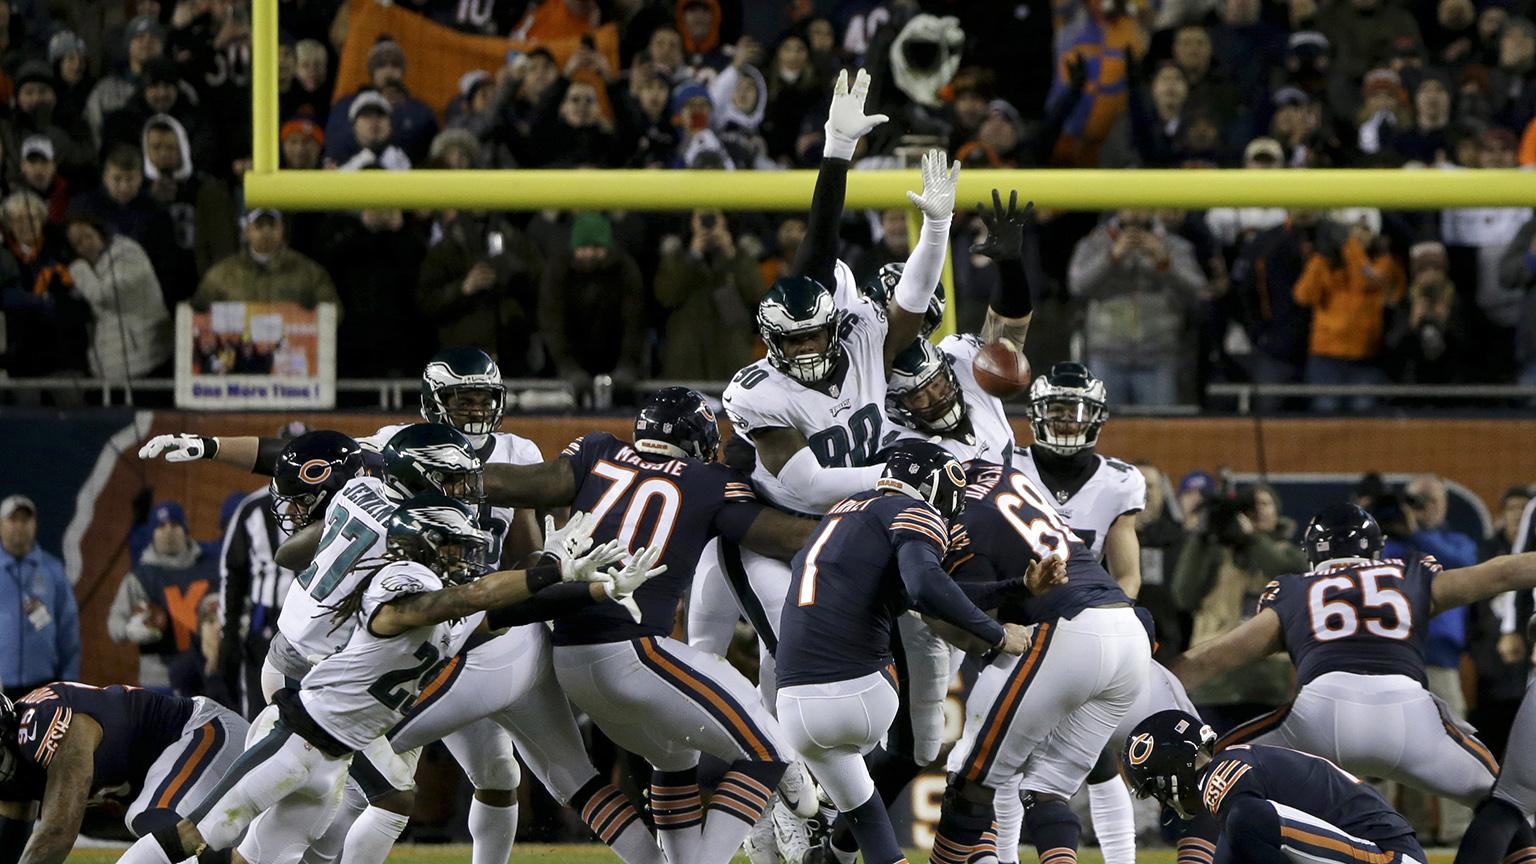 Chicago Bears kicker Cody Parkey (1) kicks and misses a field goal during the second half of an NFL wild-card playoff football game against the Philadelphia Eagles on Sunday, Jan. 6, 2019. The Eagles won 16-15. (AP Photo / David Banks)